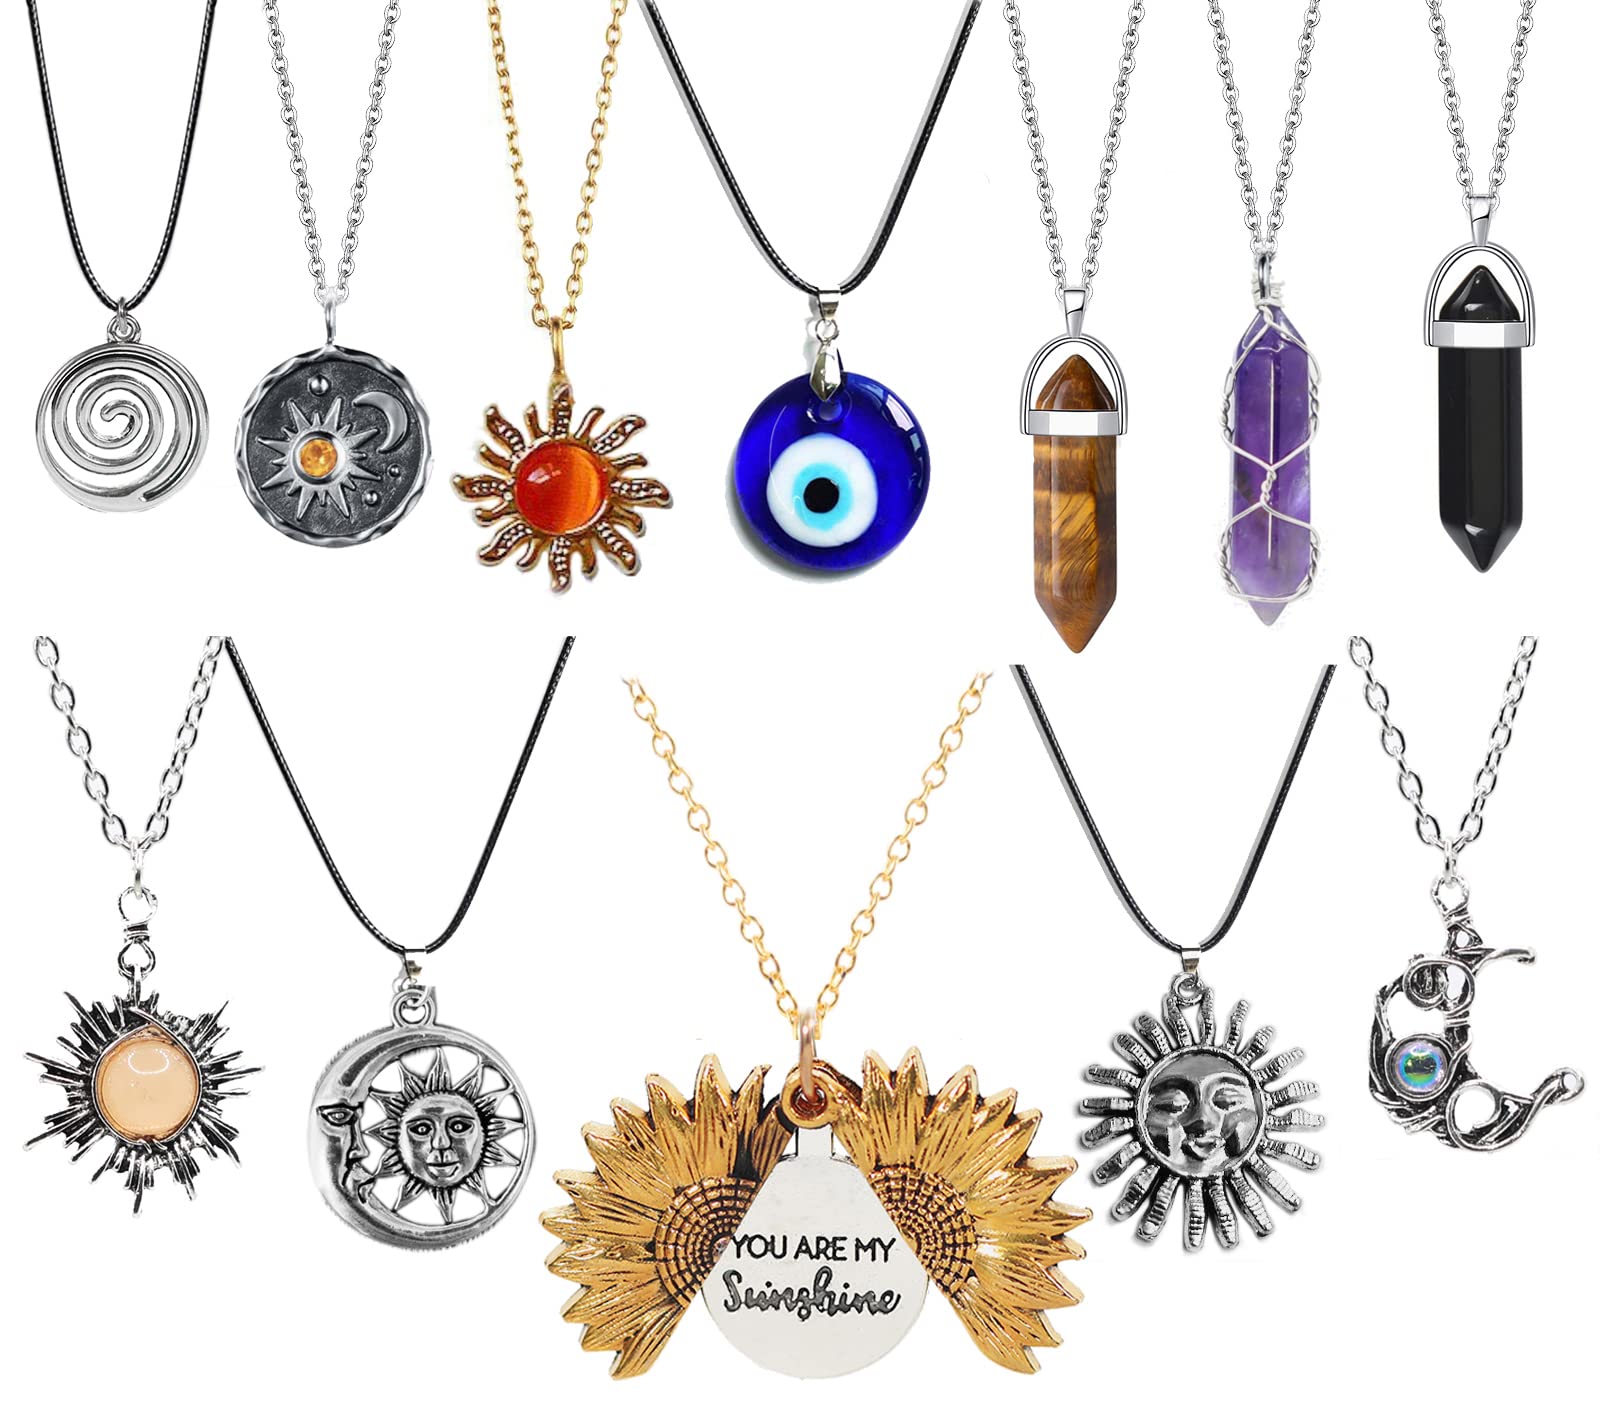 YIISIIY 12 Pcs Crystal Pendant Necklace Evil Eye Necklace Sunflower Necklace Moon and Sun Hippie Necklace Indie Aesthetic Jewelry Accessories Set for Women Men Girls